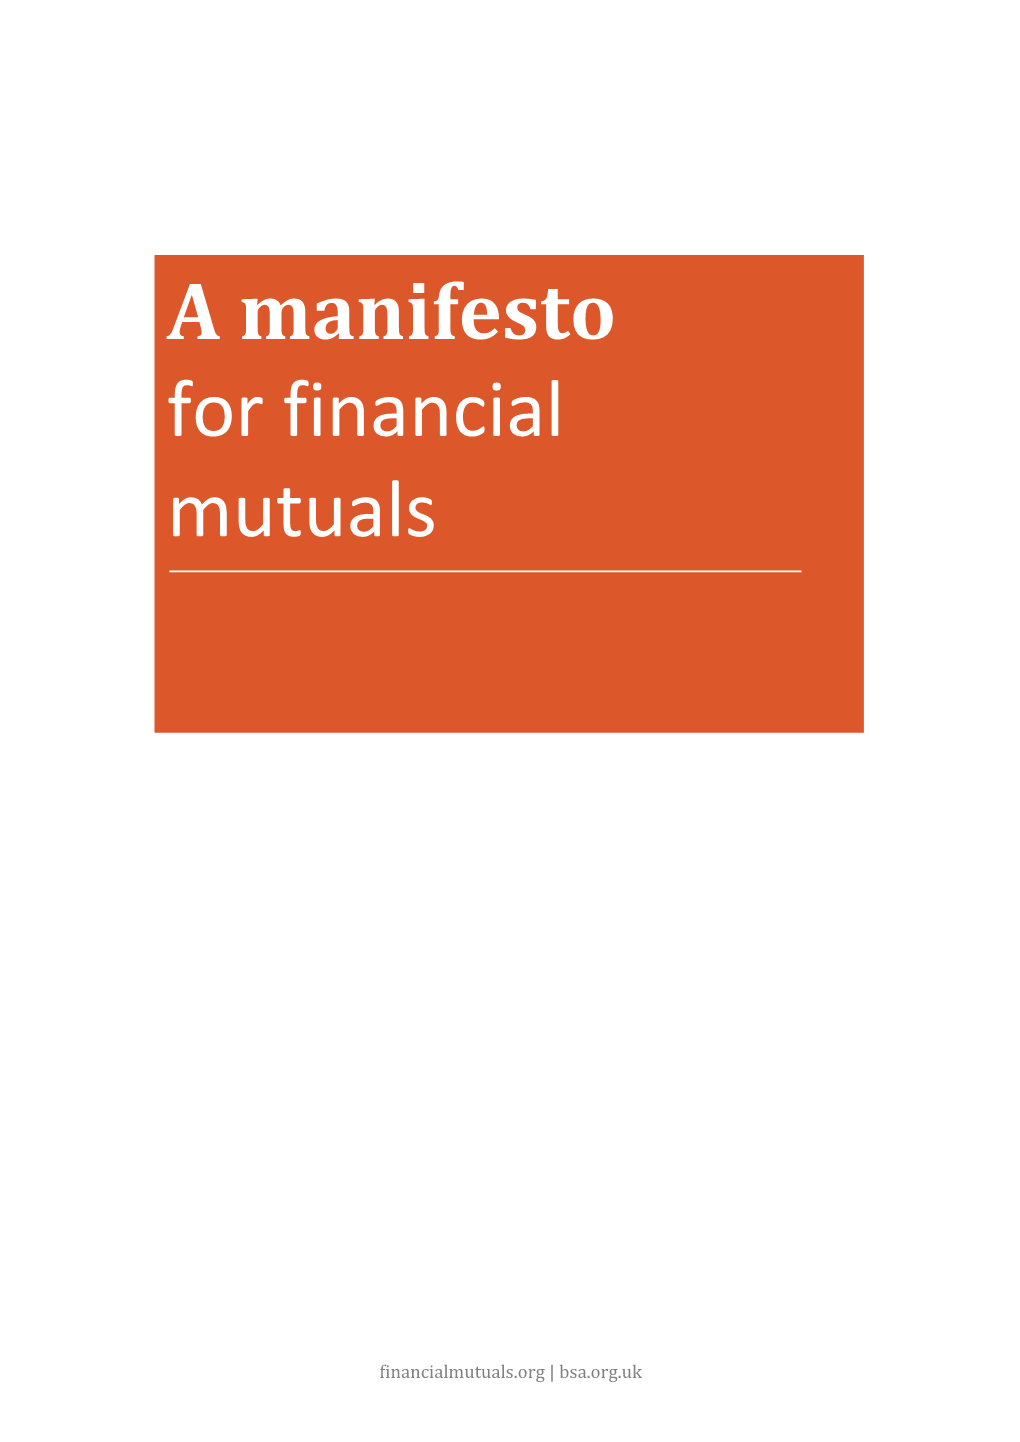 A Manifesto for Financial Mutuals